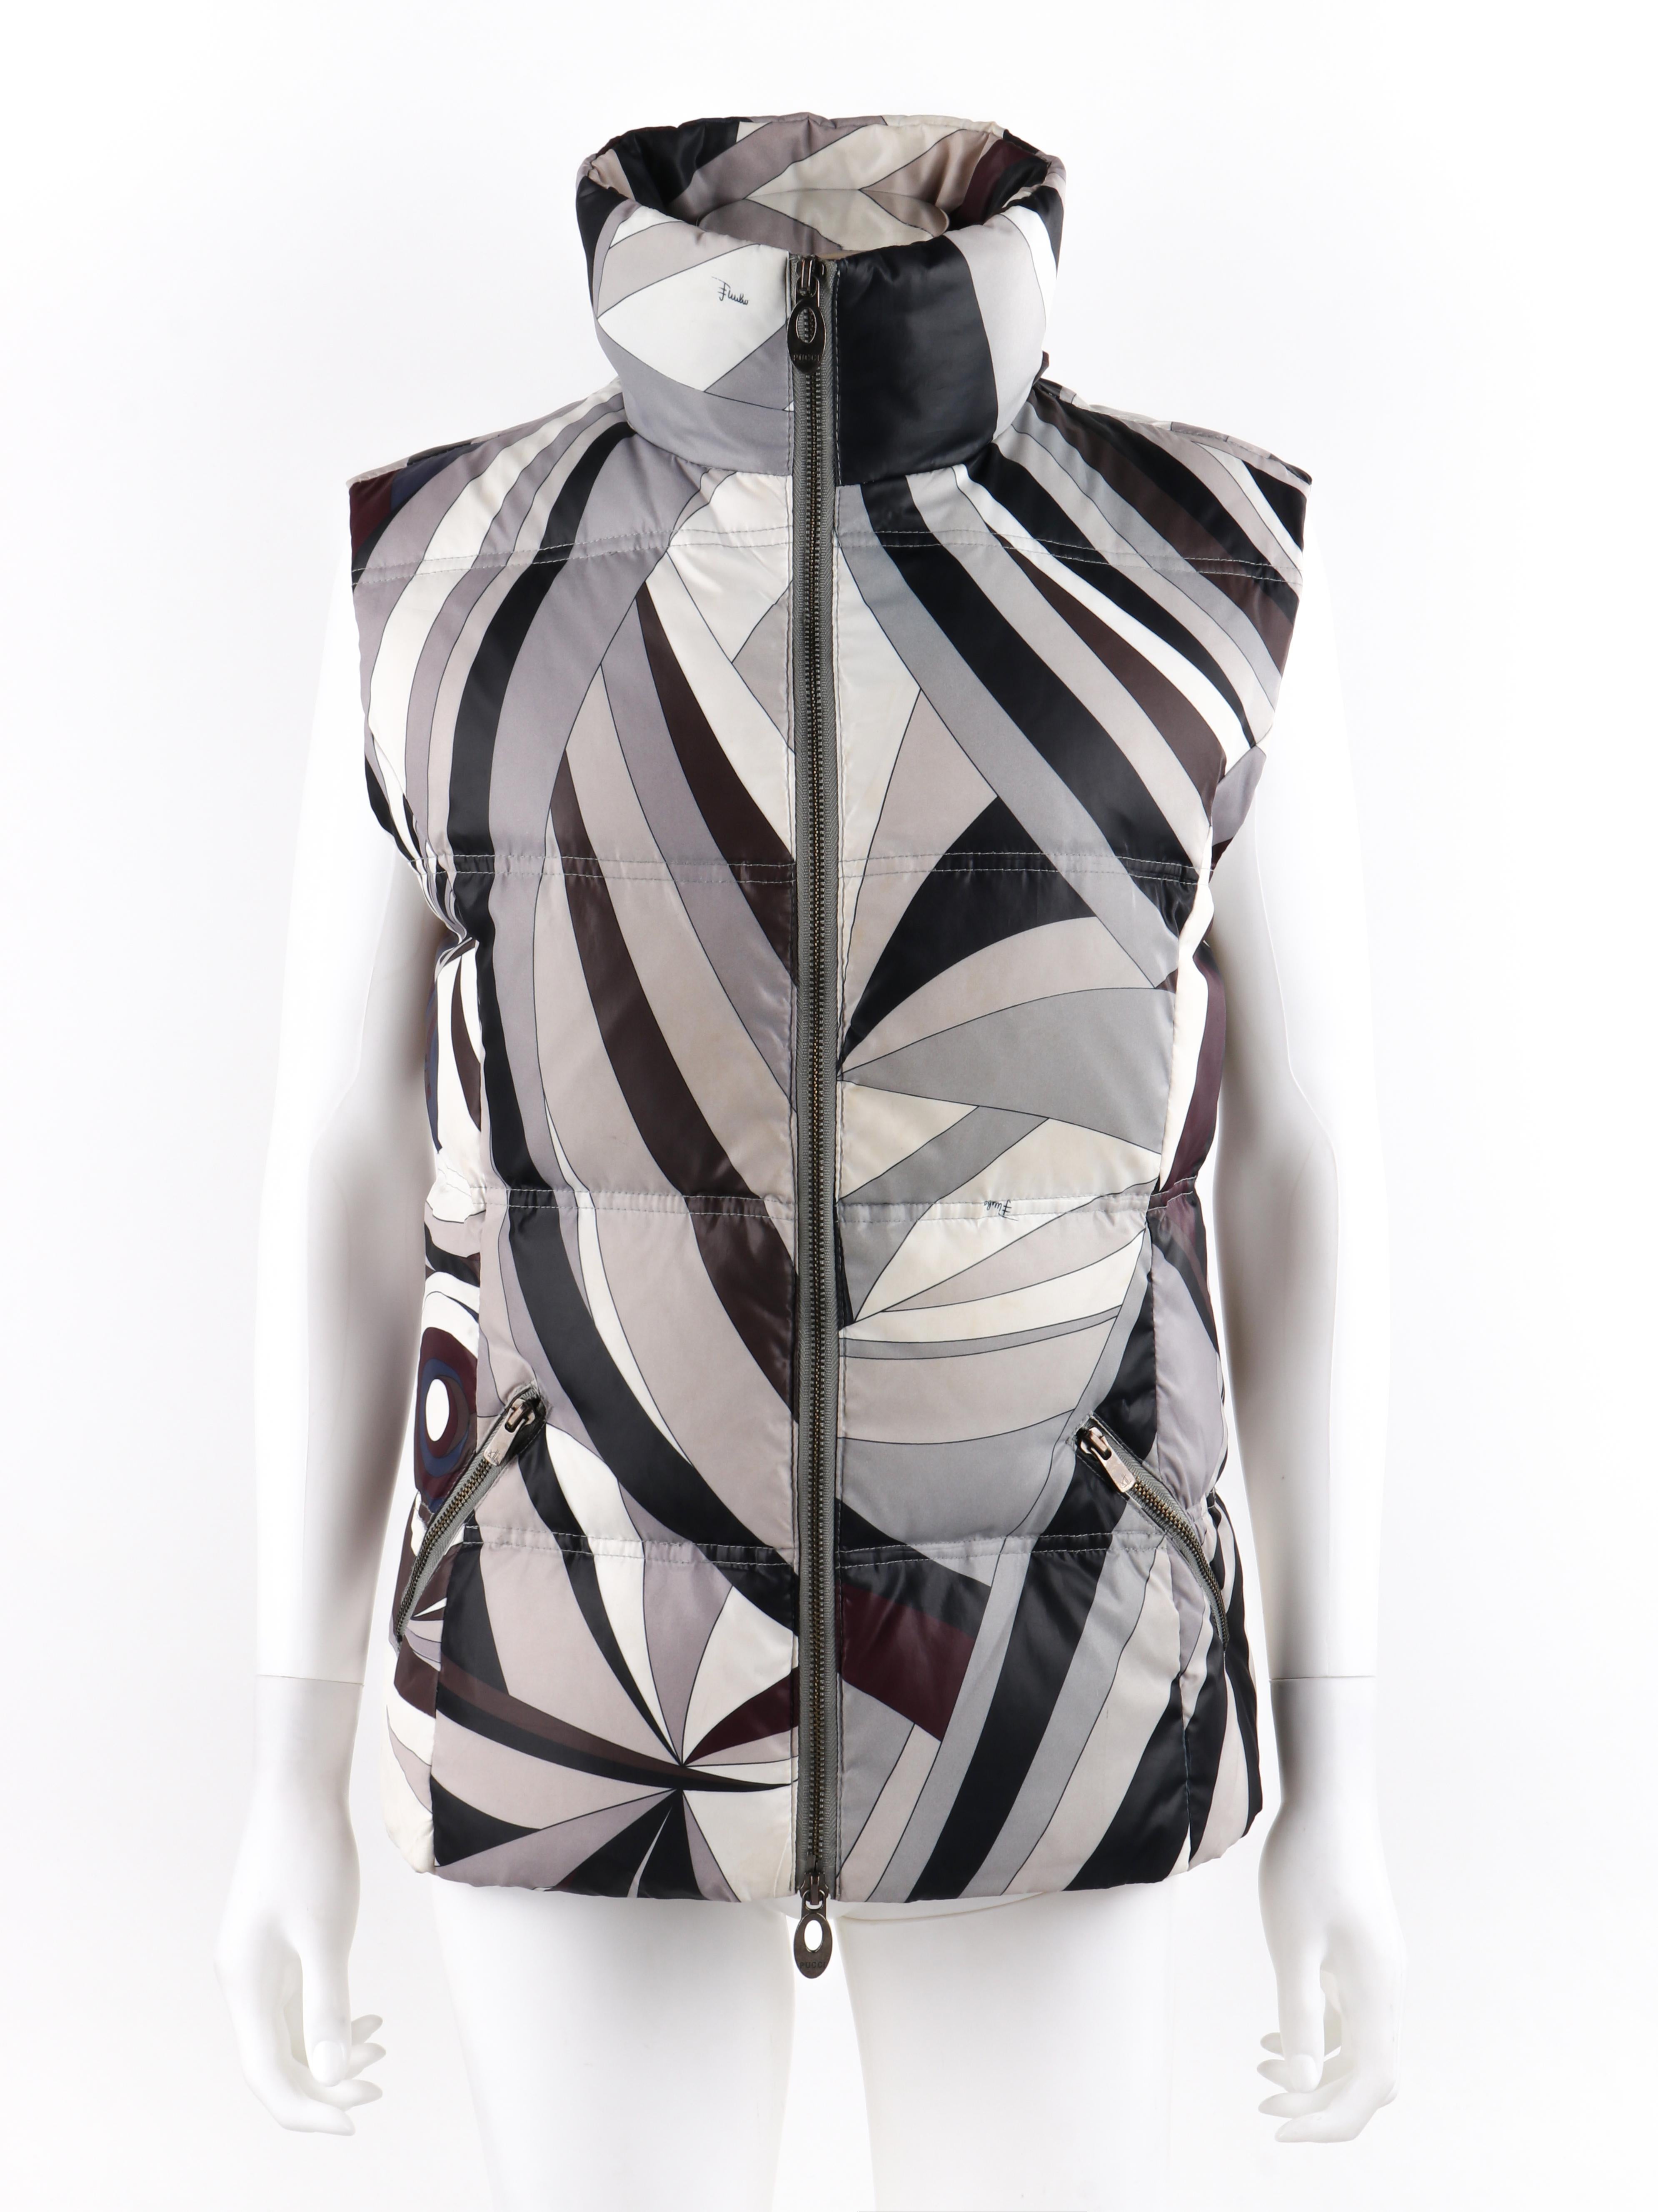 EMILIO PUCCI Pre-Fall 2012 Firenze Signature Op Art Hooded Ski Snow Puffer Vest Jacket
 
Brand / Manufacturer: Emilio Pucci 
Circa: Pre Fall 2012
Style: Hooded puffer vest jacket 
Color(s): Shades of white, gray, blue, purple, and black
Lined: